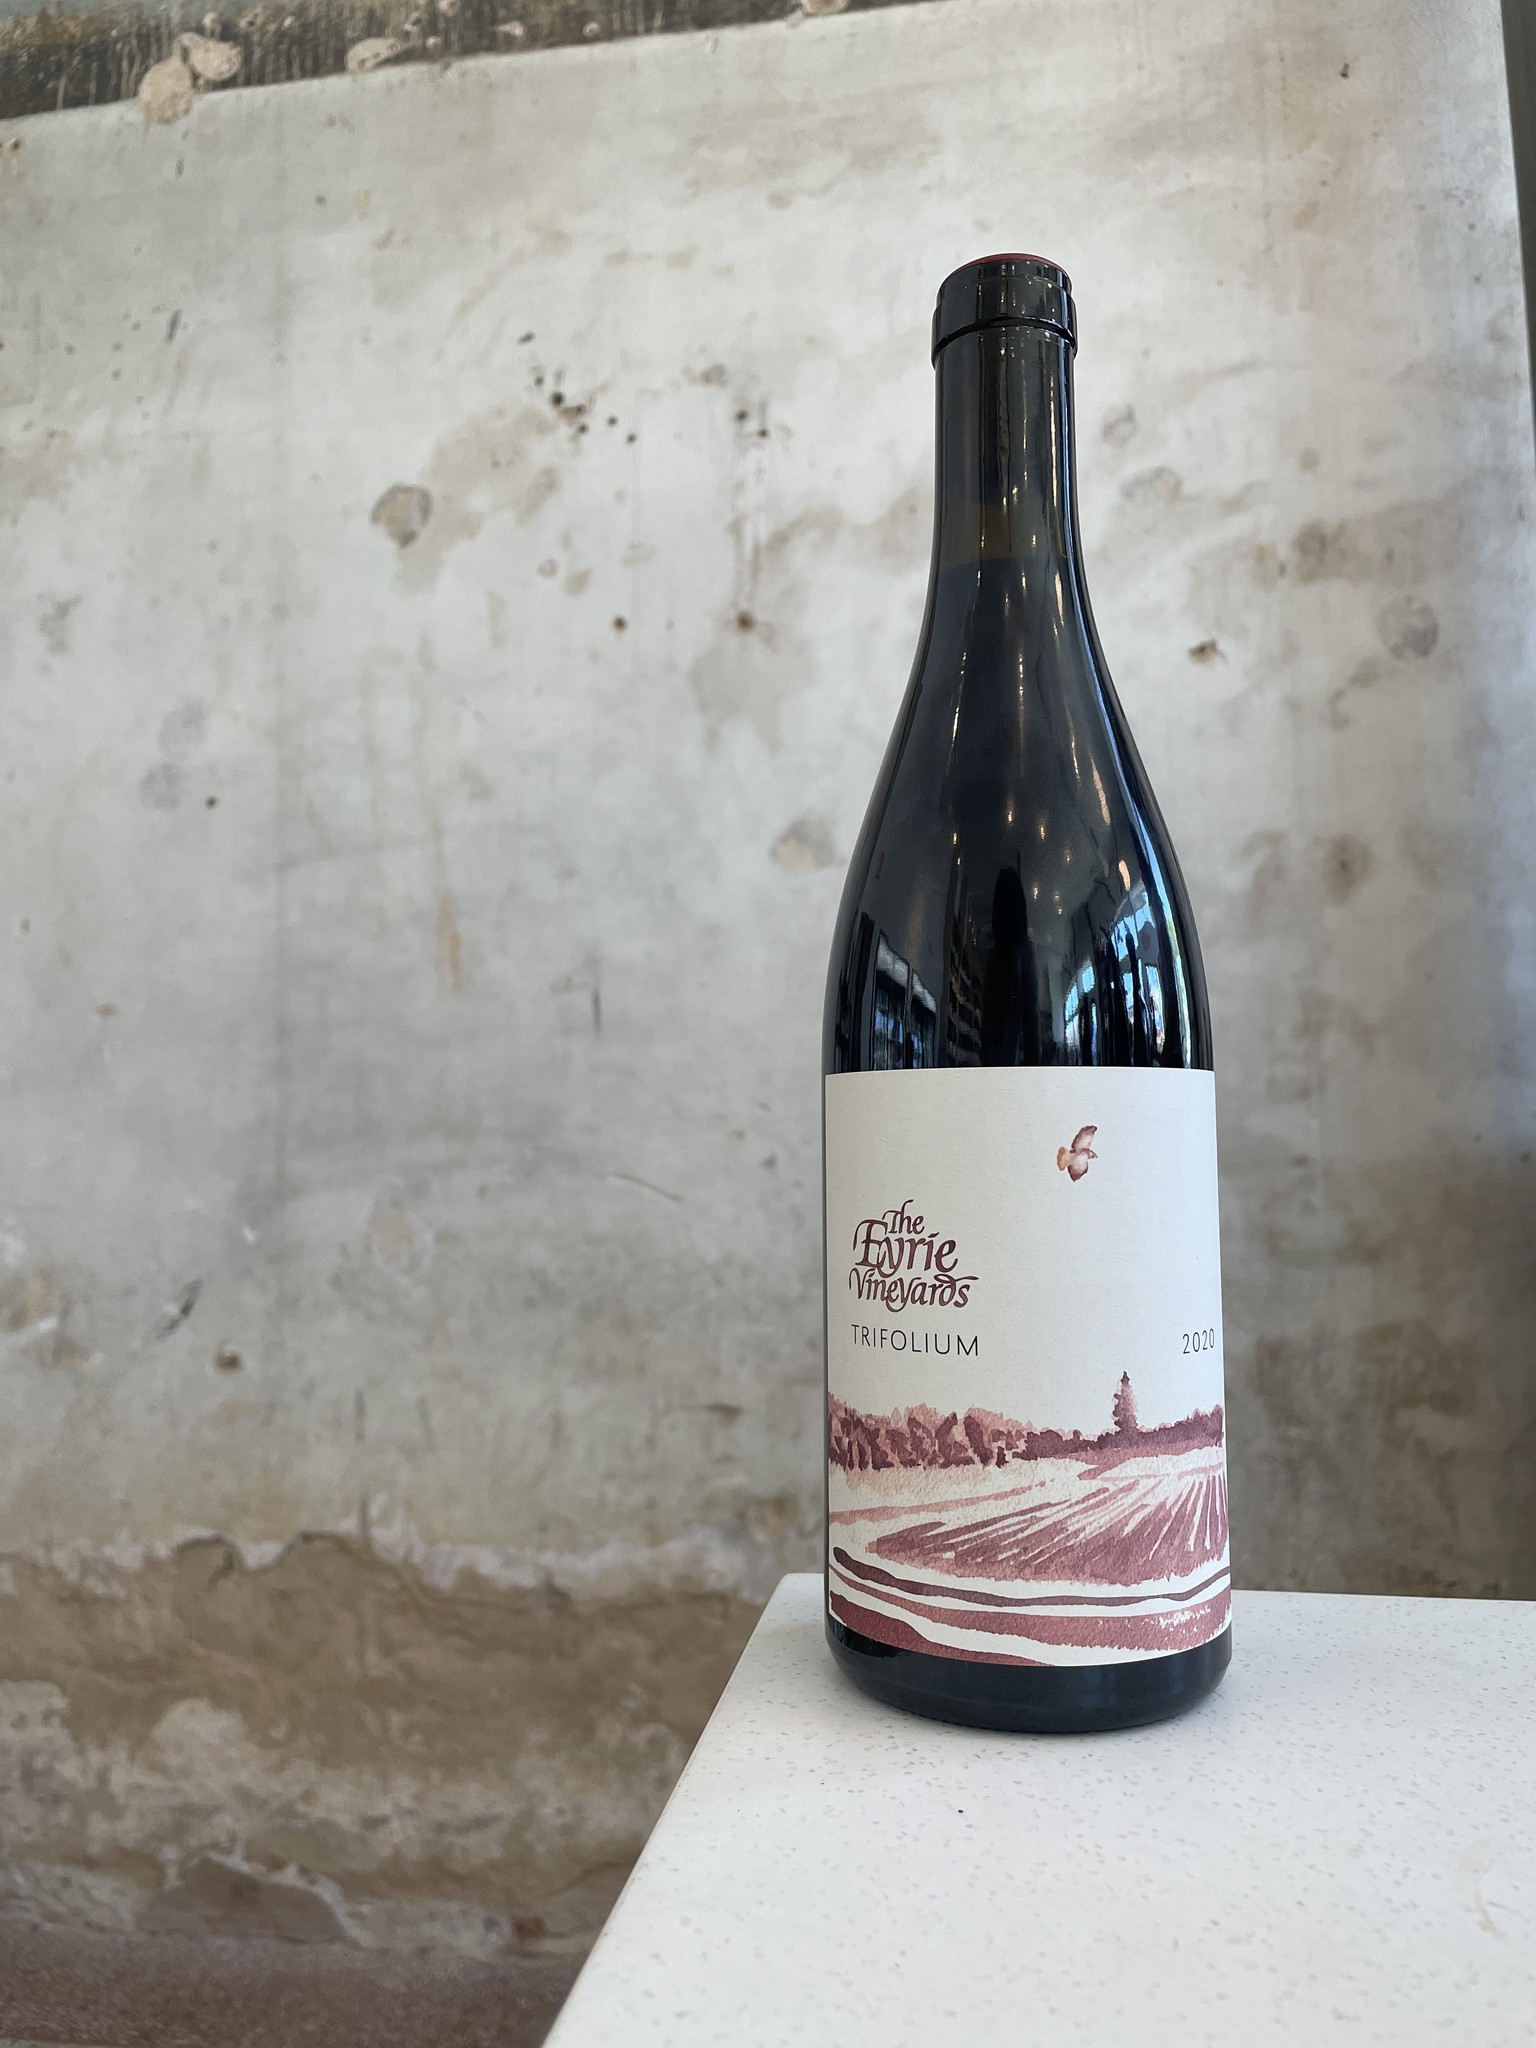 The Eyrie Vineyards 'Trifolium' Red Blend